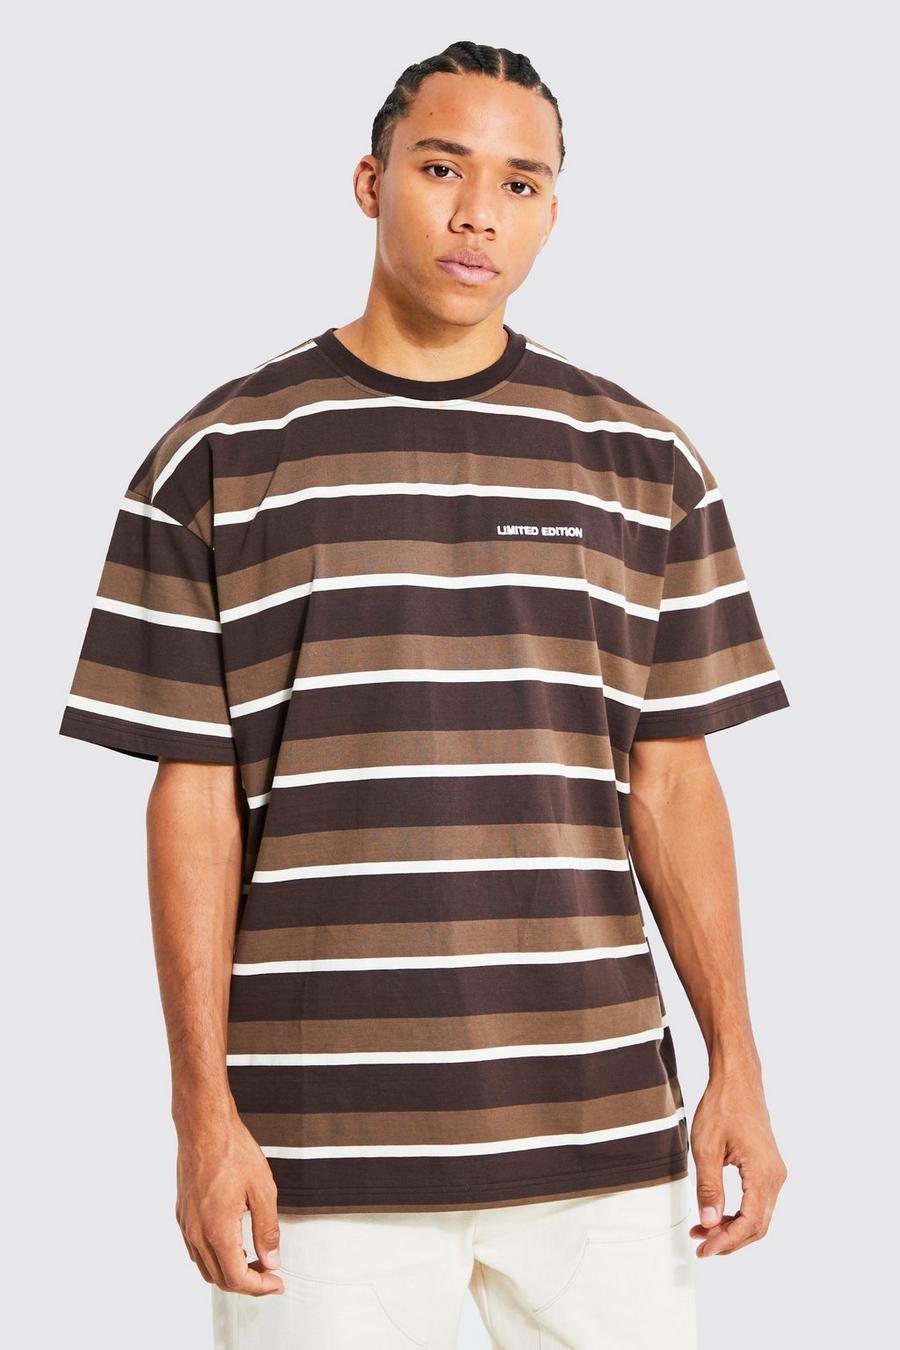 T-shirt Tall comoda a righe Limited Edition, Brown marrone